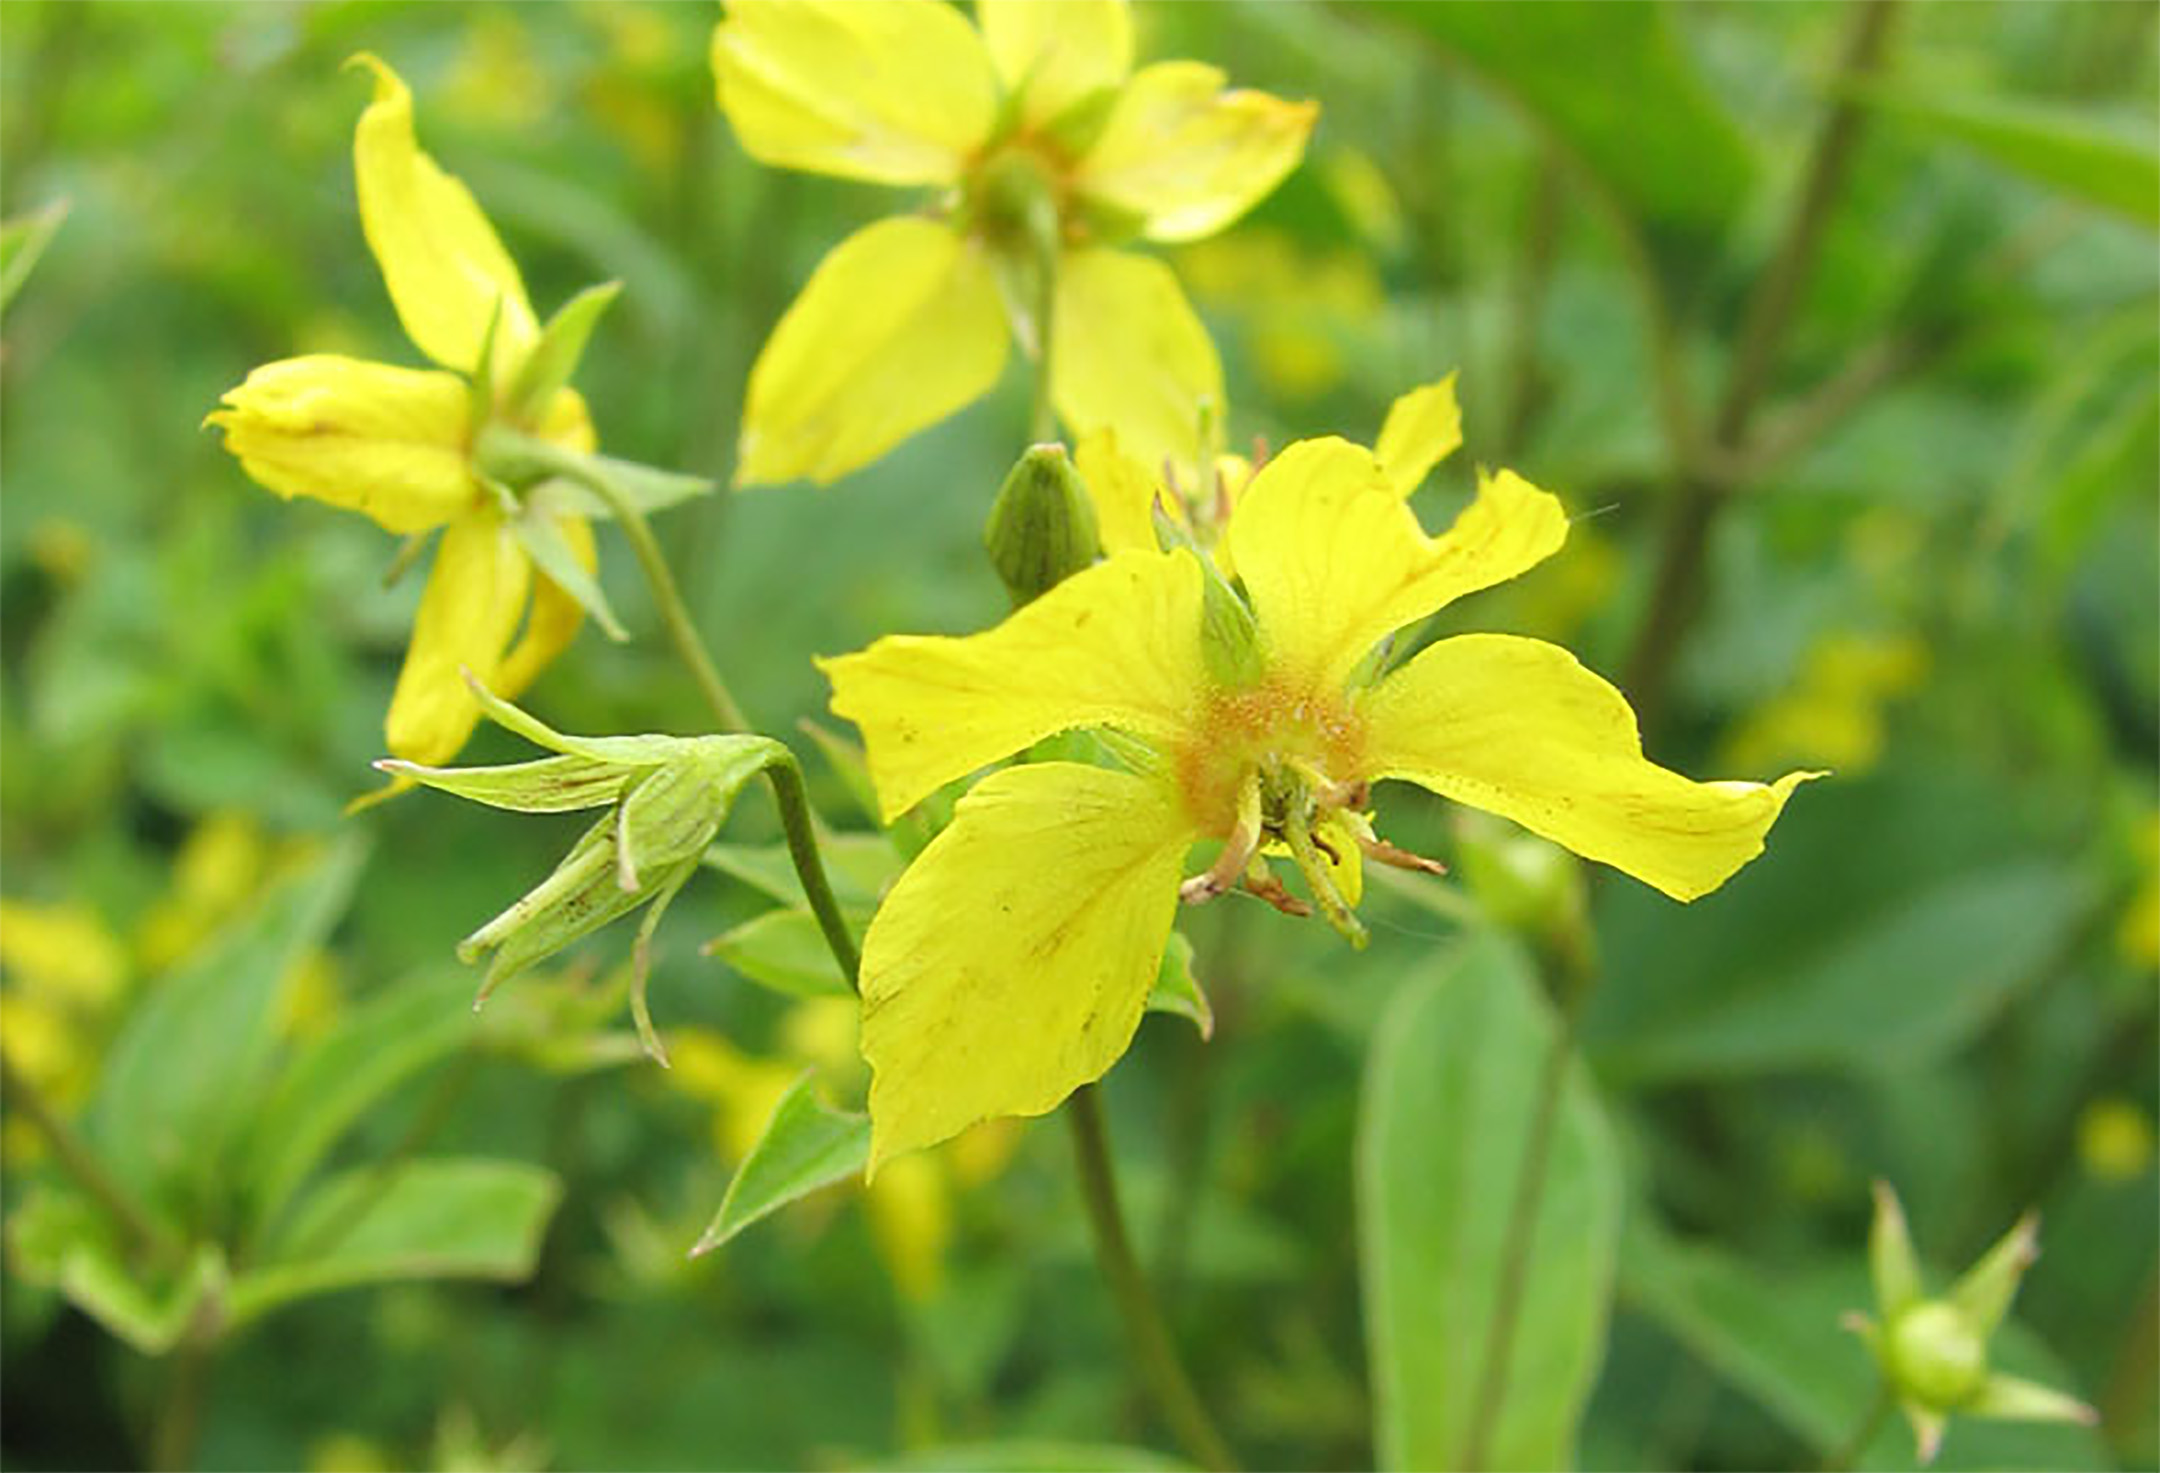 A close-up image of a group of yellow flowers. Each flower has 5 petals that spread wide to expose the center of the flower.